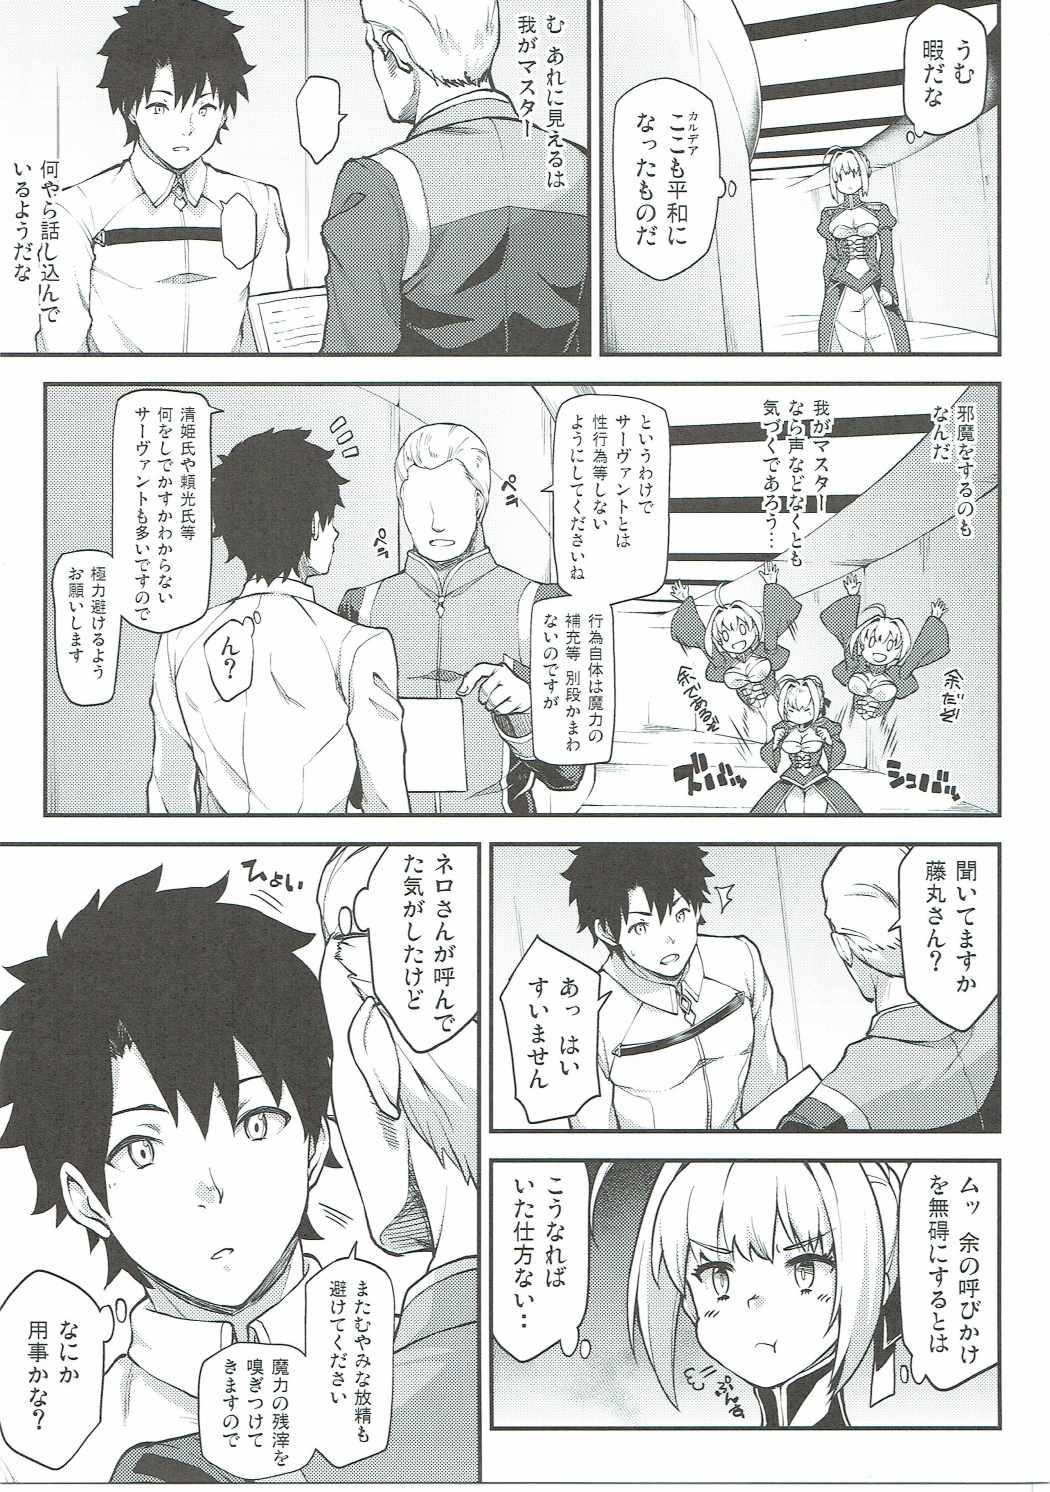 Best Blowjob Ever Dosukebe Saber Wars - Fate grand order Bwc - Page 10